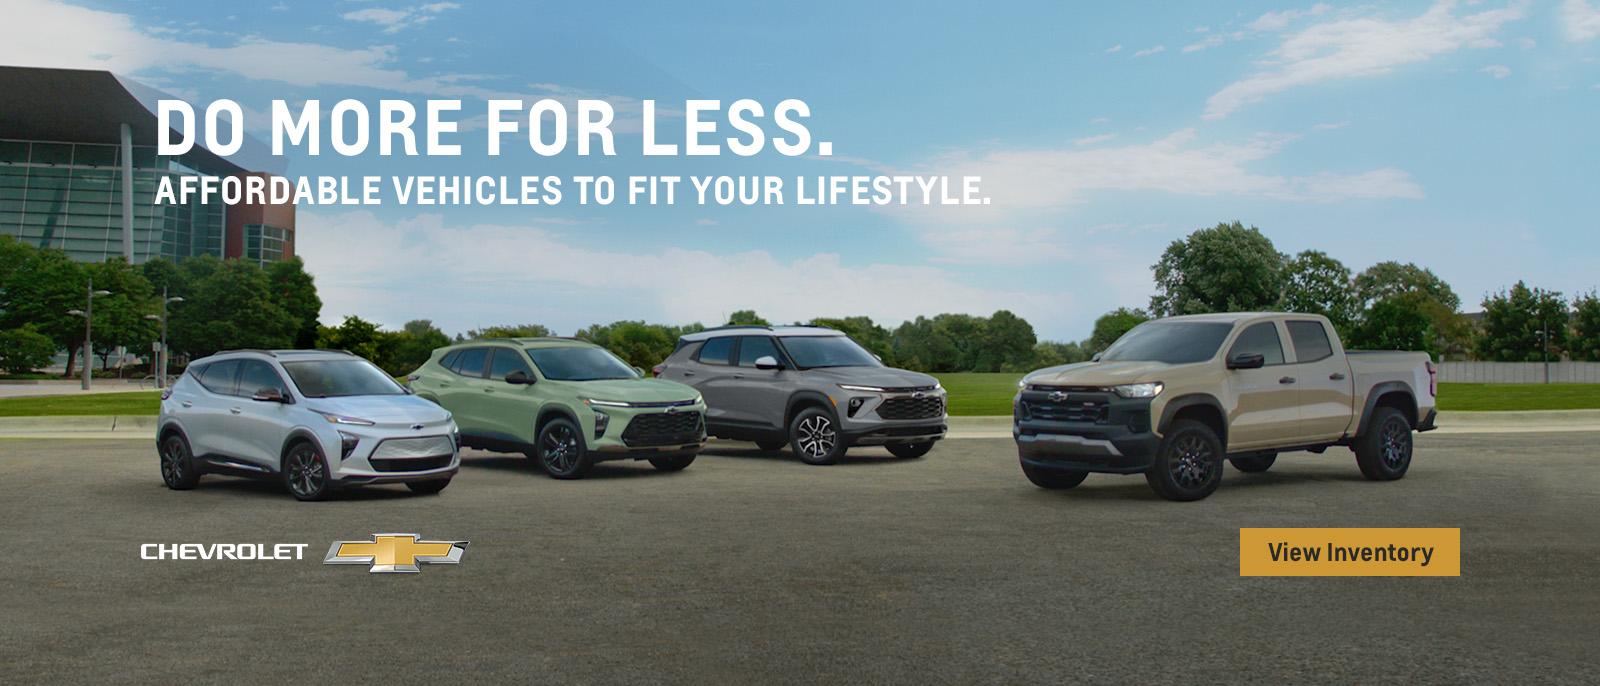 Do more for less. Affordable vehicles to fit your lifestyle.